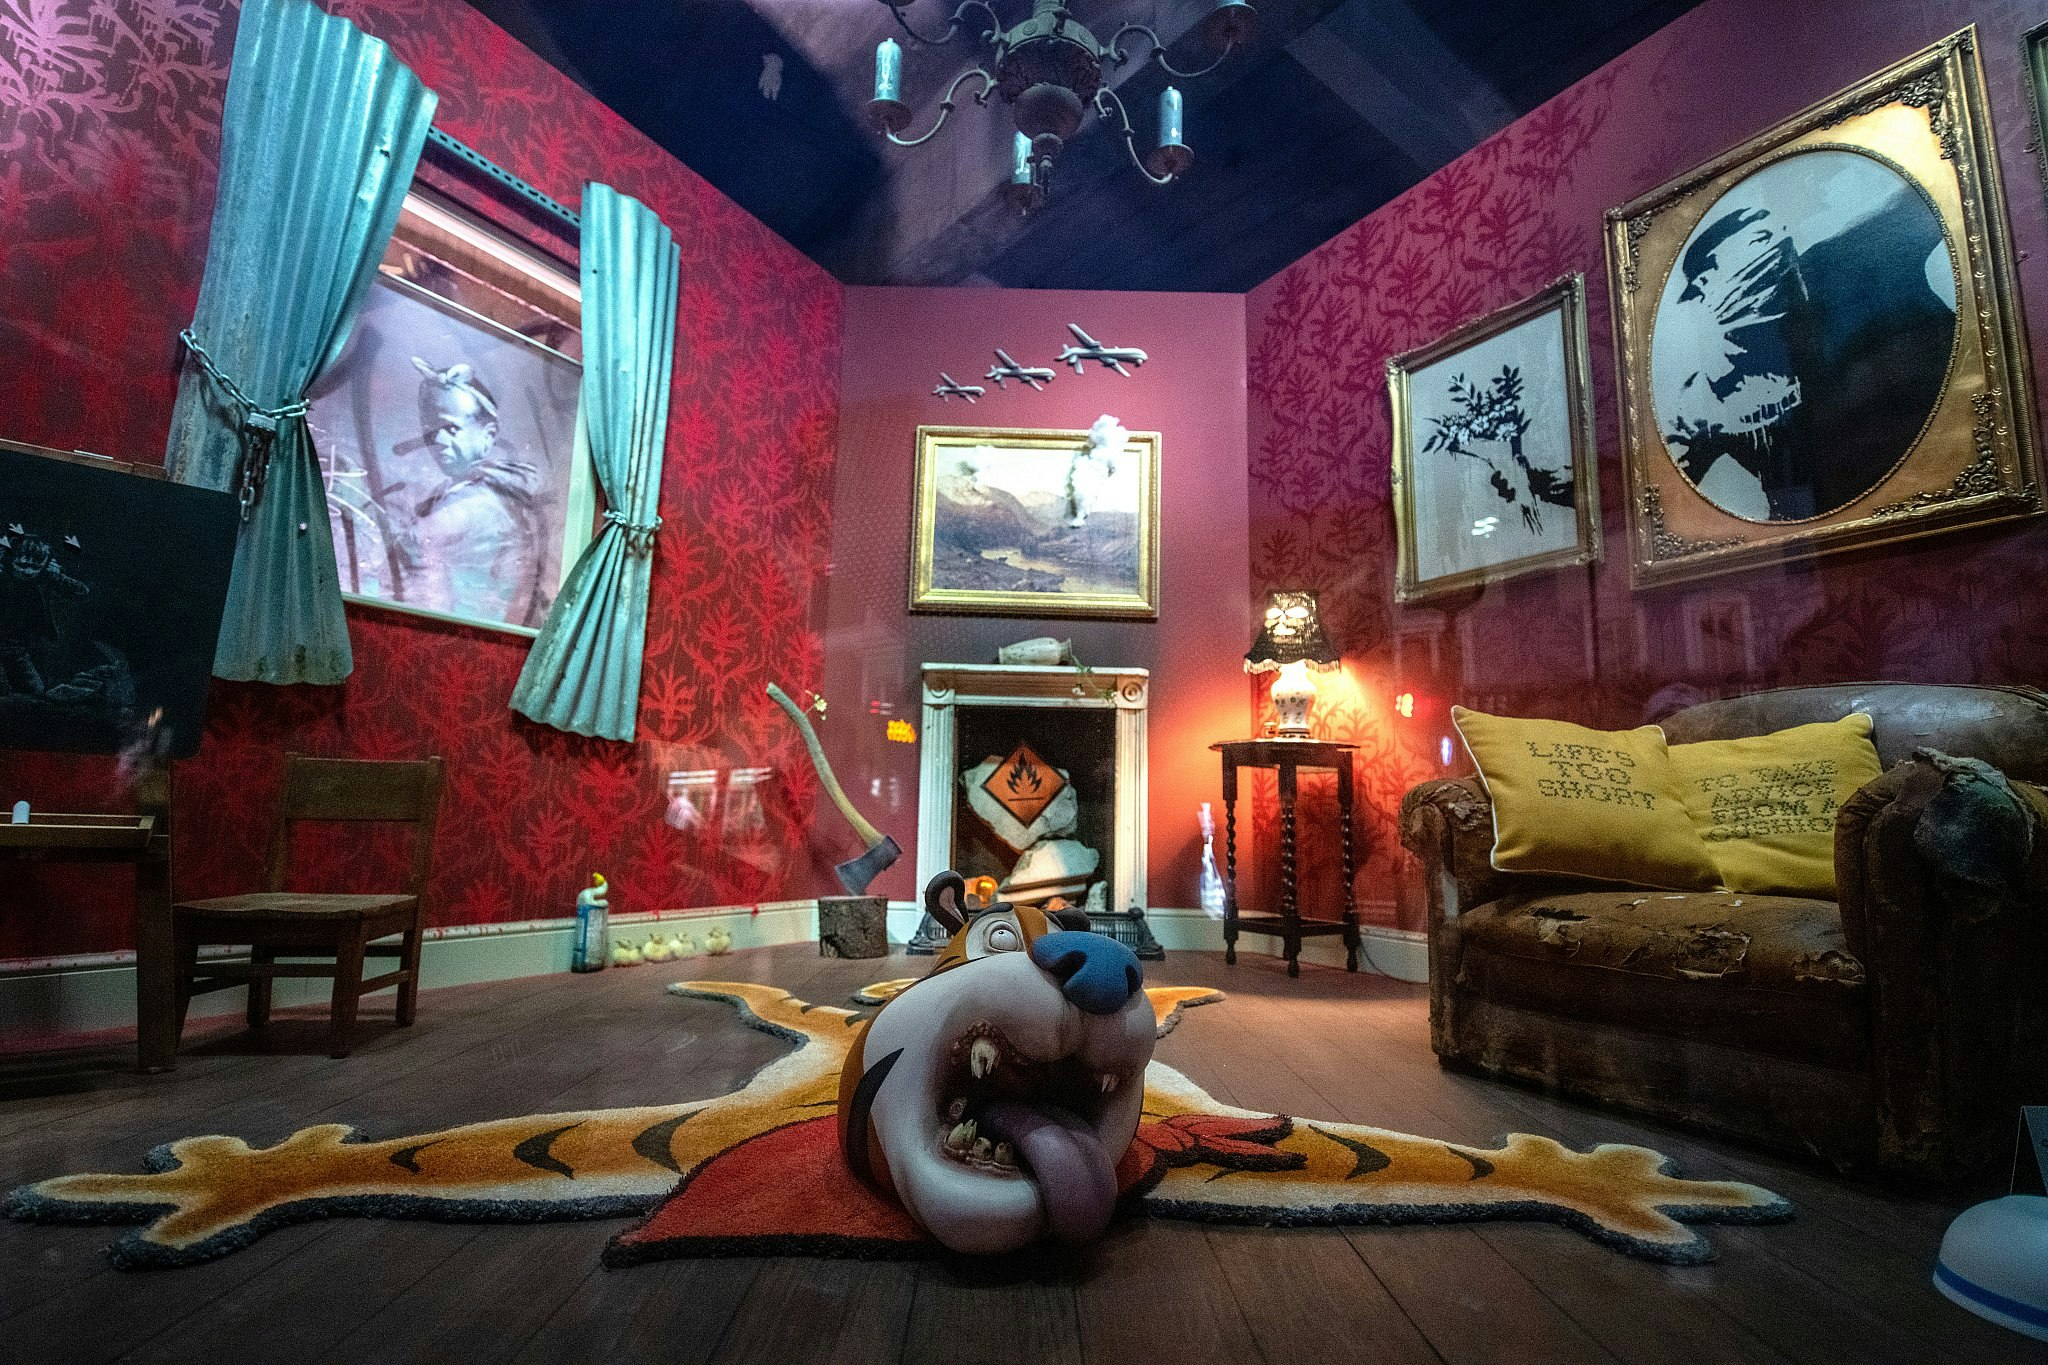 A living room with red walls containing a number of unusual objects, including a rug seemingly made from the body of cereal character Tony the Tiger, and an axe sunk into a tree stump.